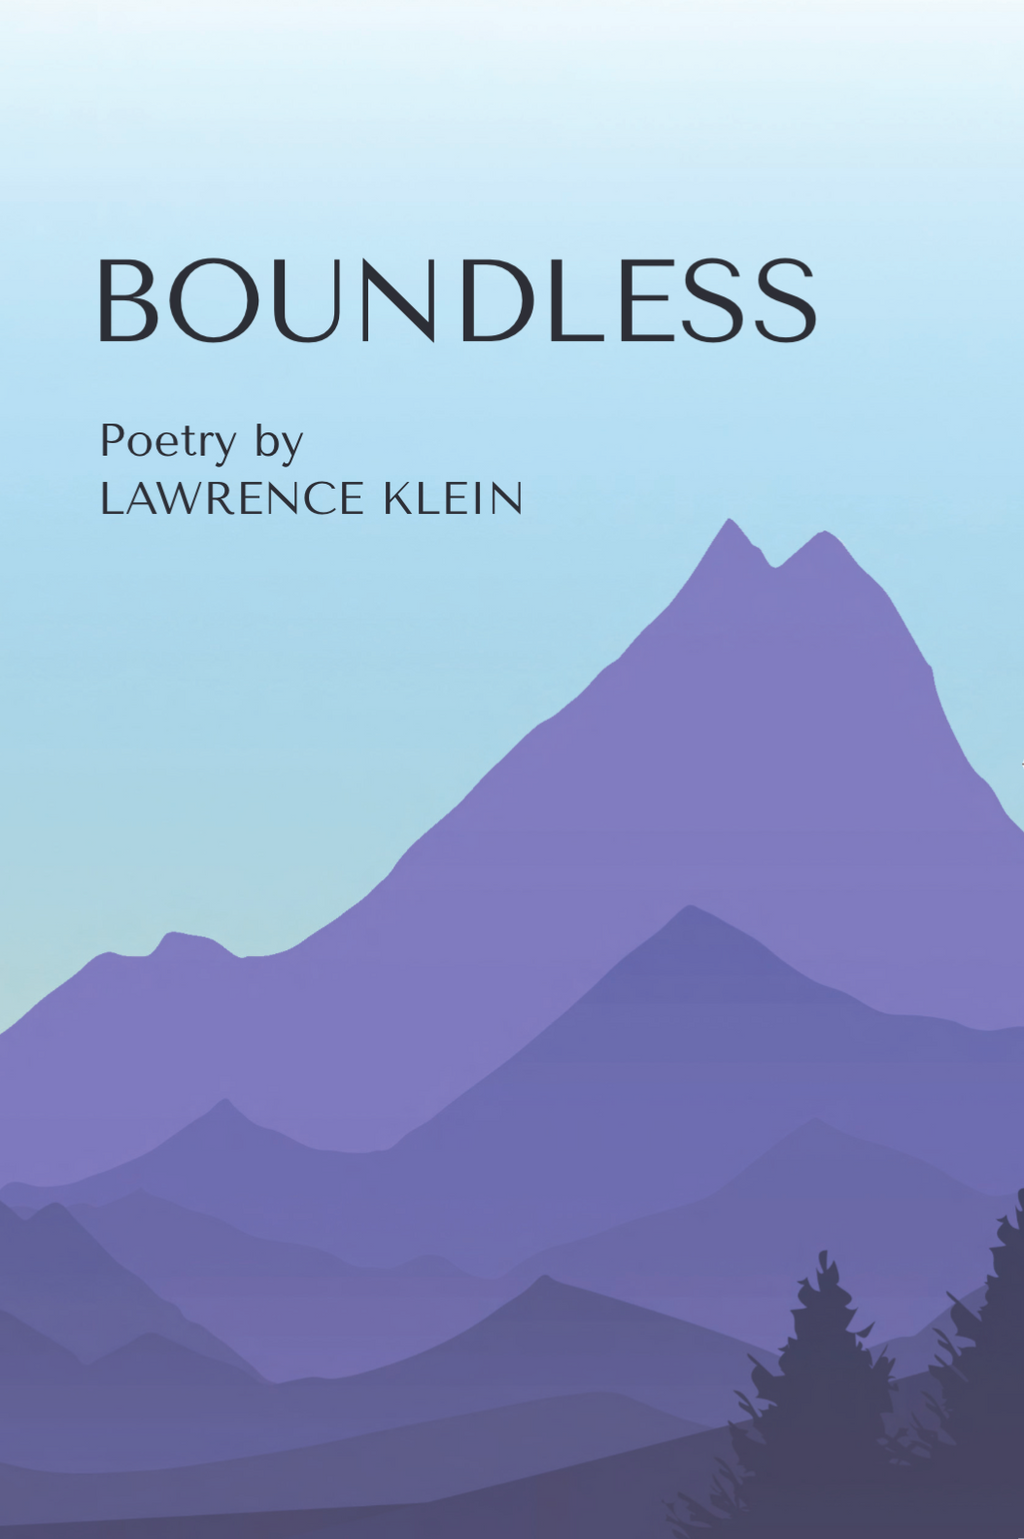 Boundless by Lawrence Klein